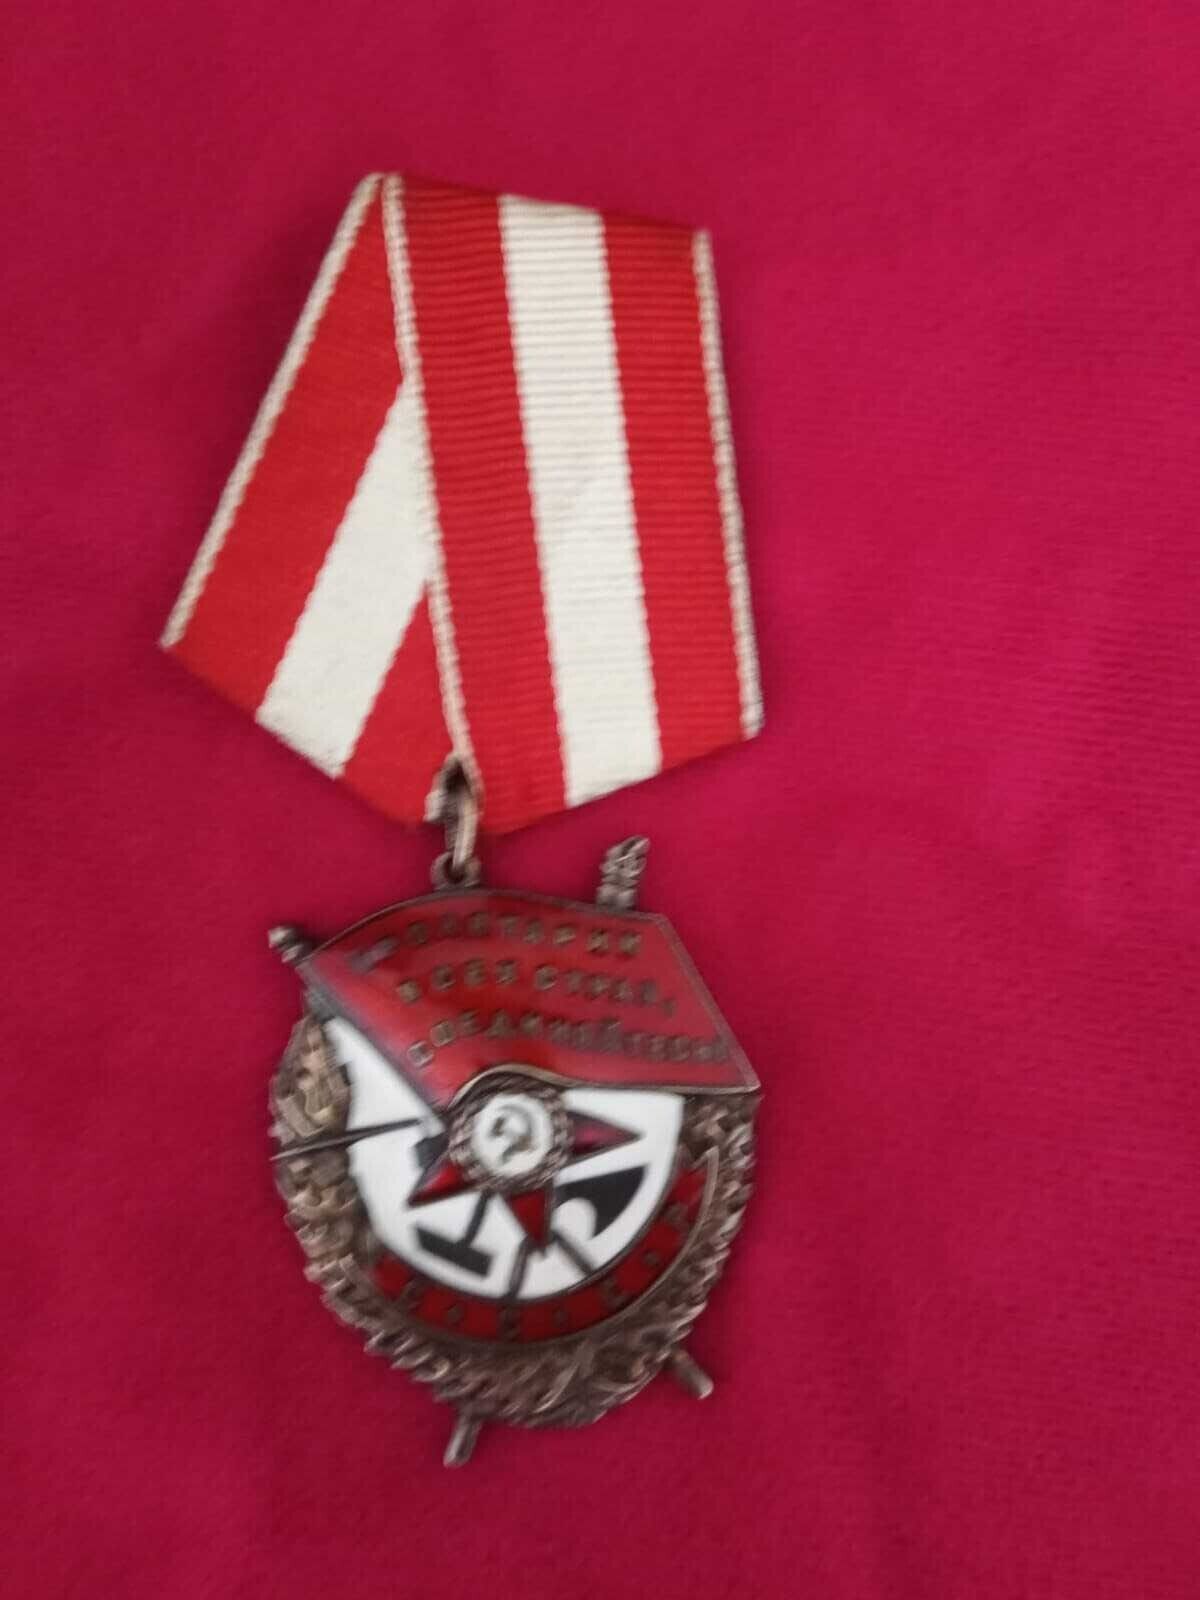 Soviet Union WW2 Order Of the Red Banner # 345327 Medal Valik Variant USA ONLY